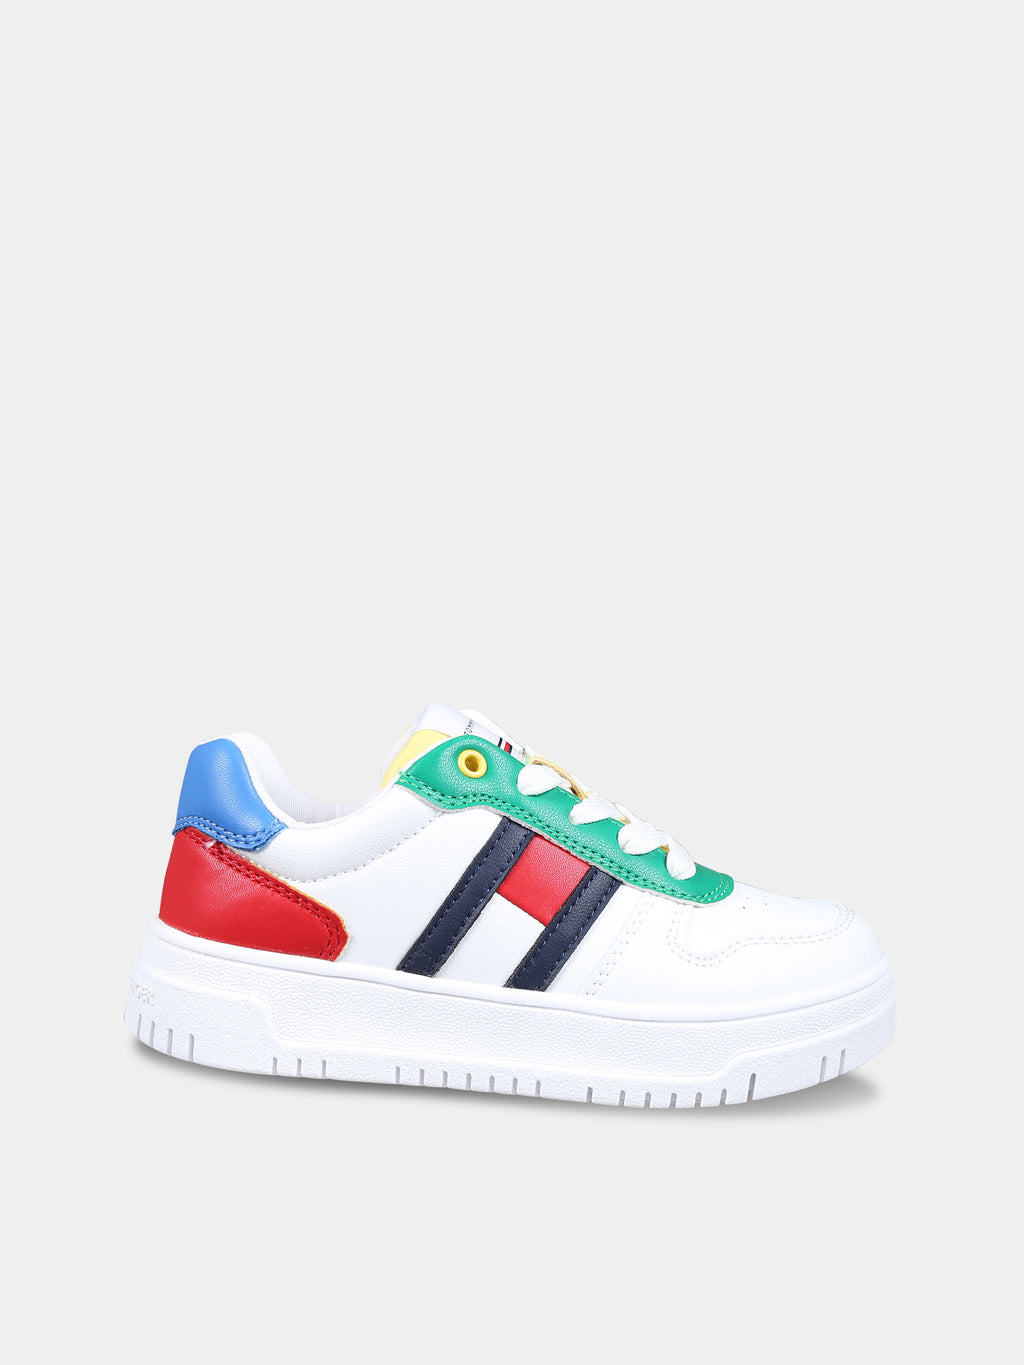 White sneakers for kids with flag